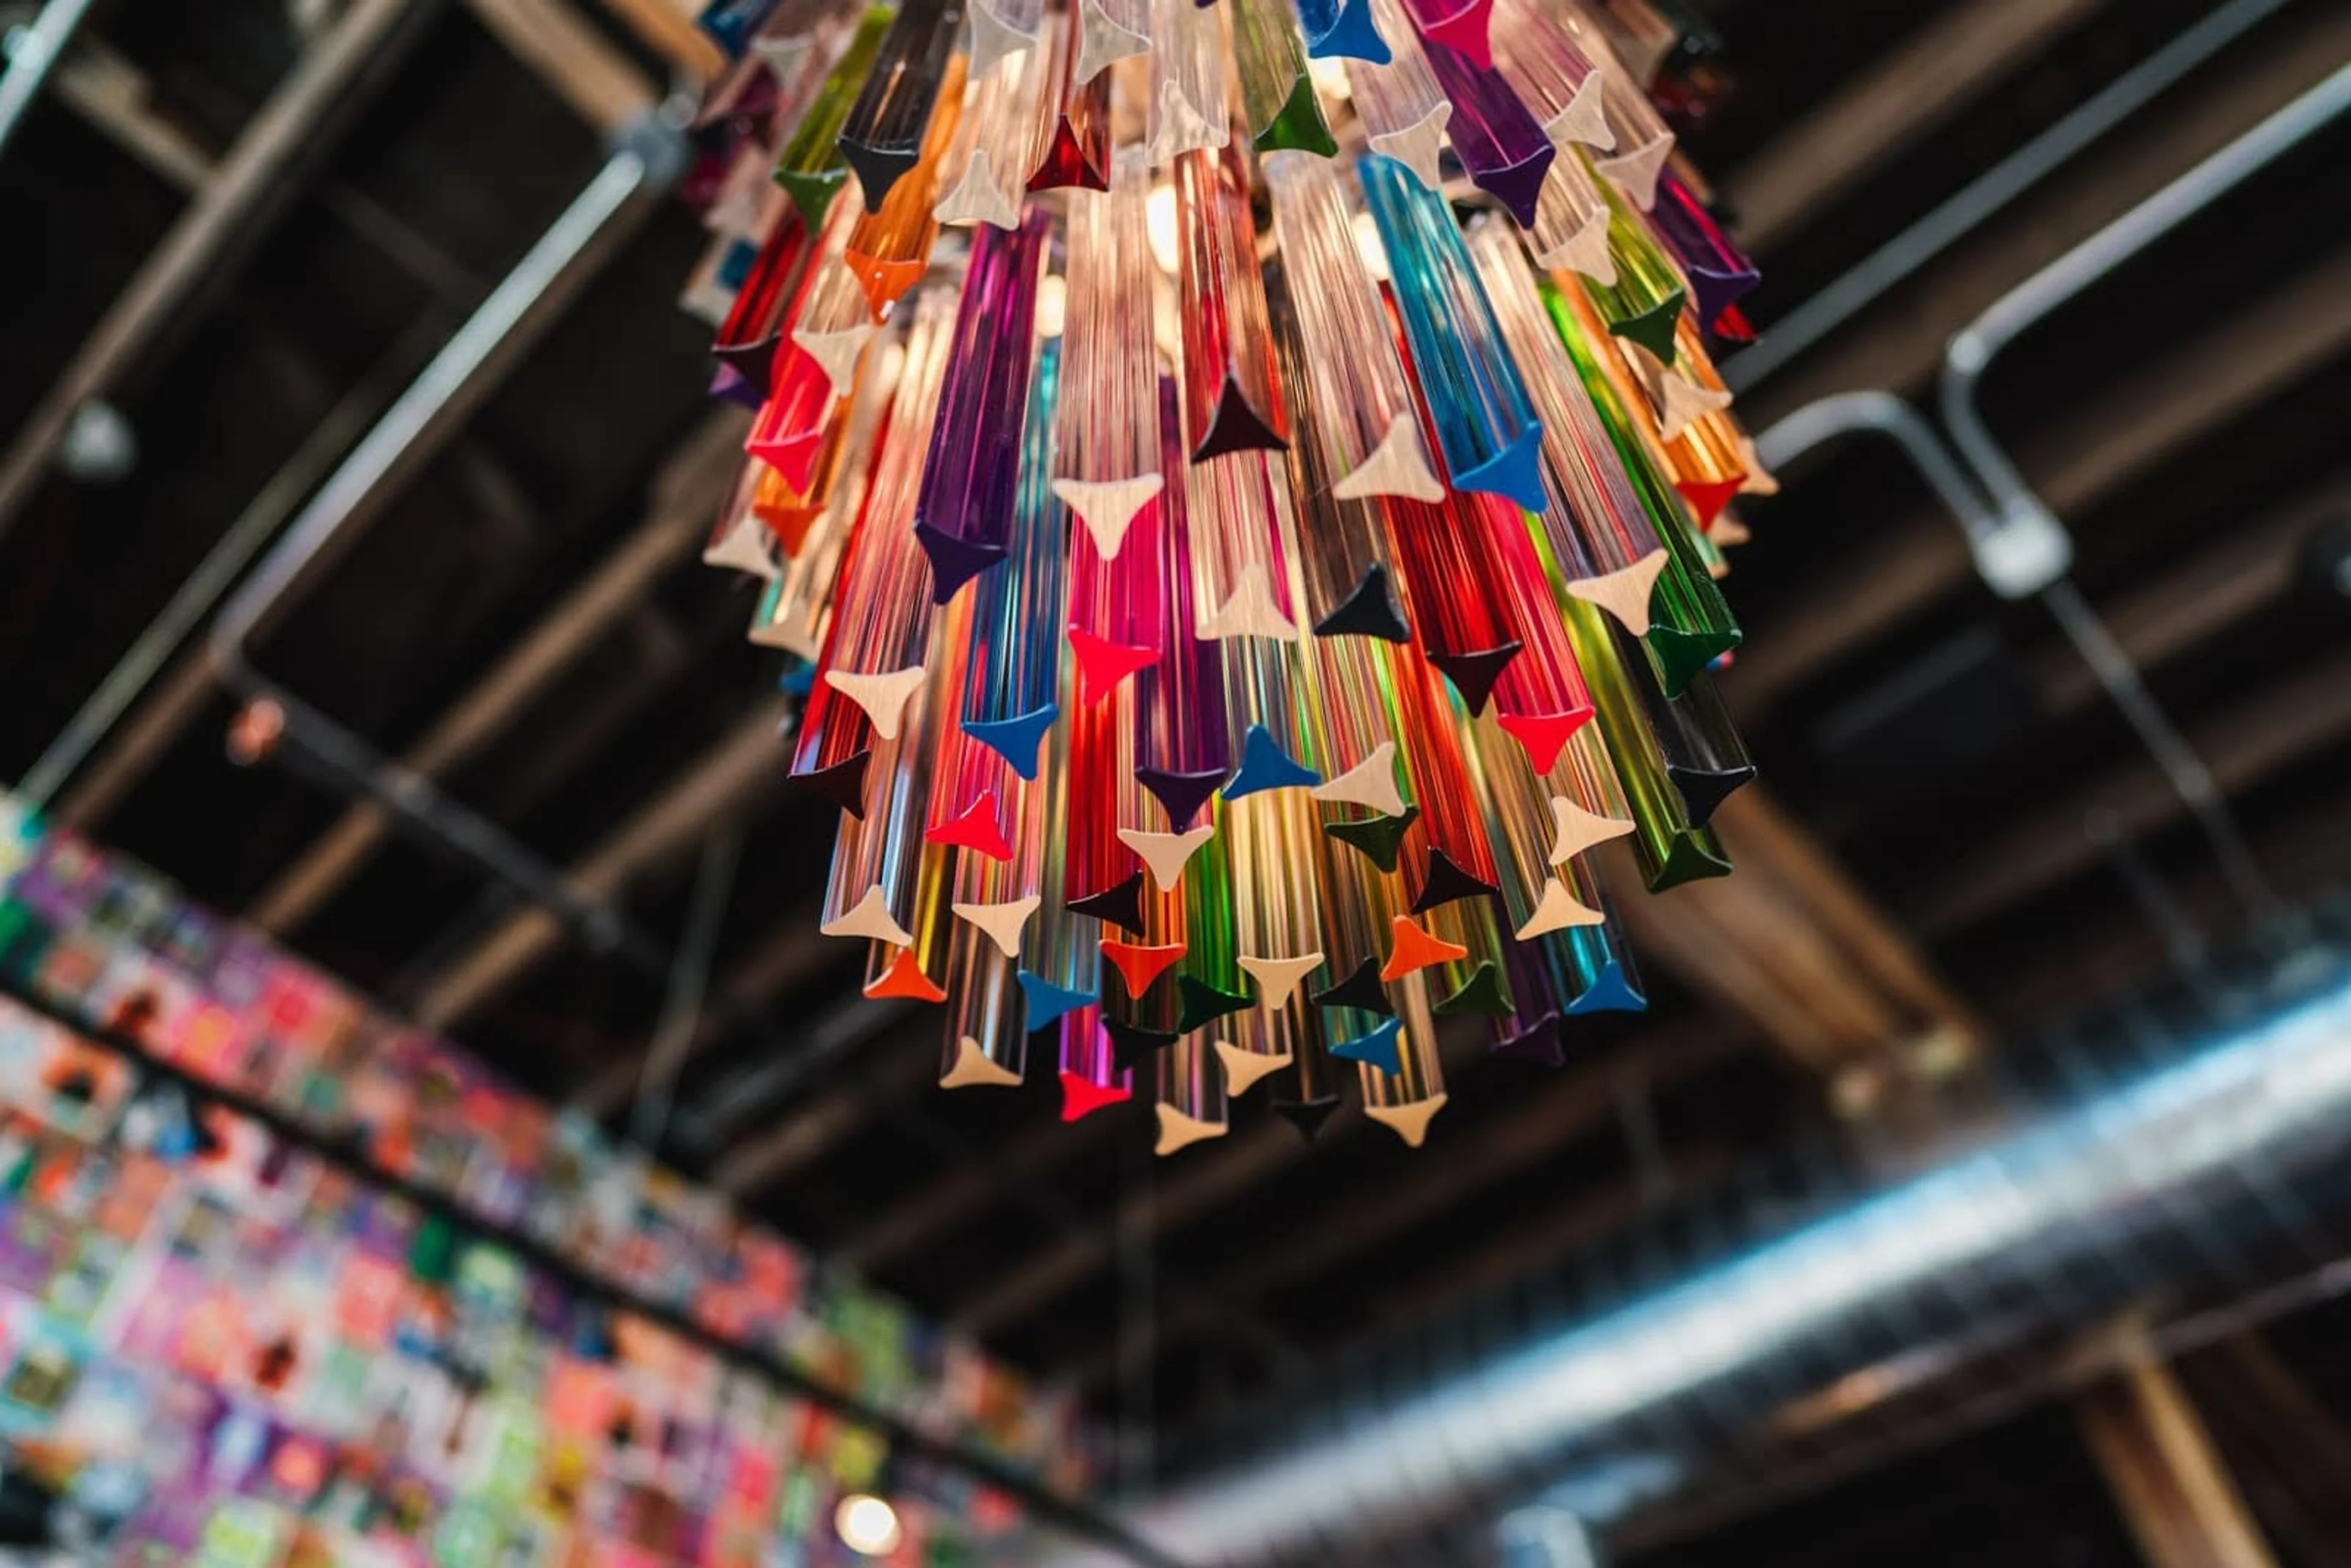 A colorful glass chandelier